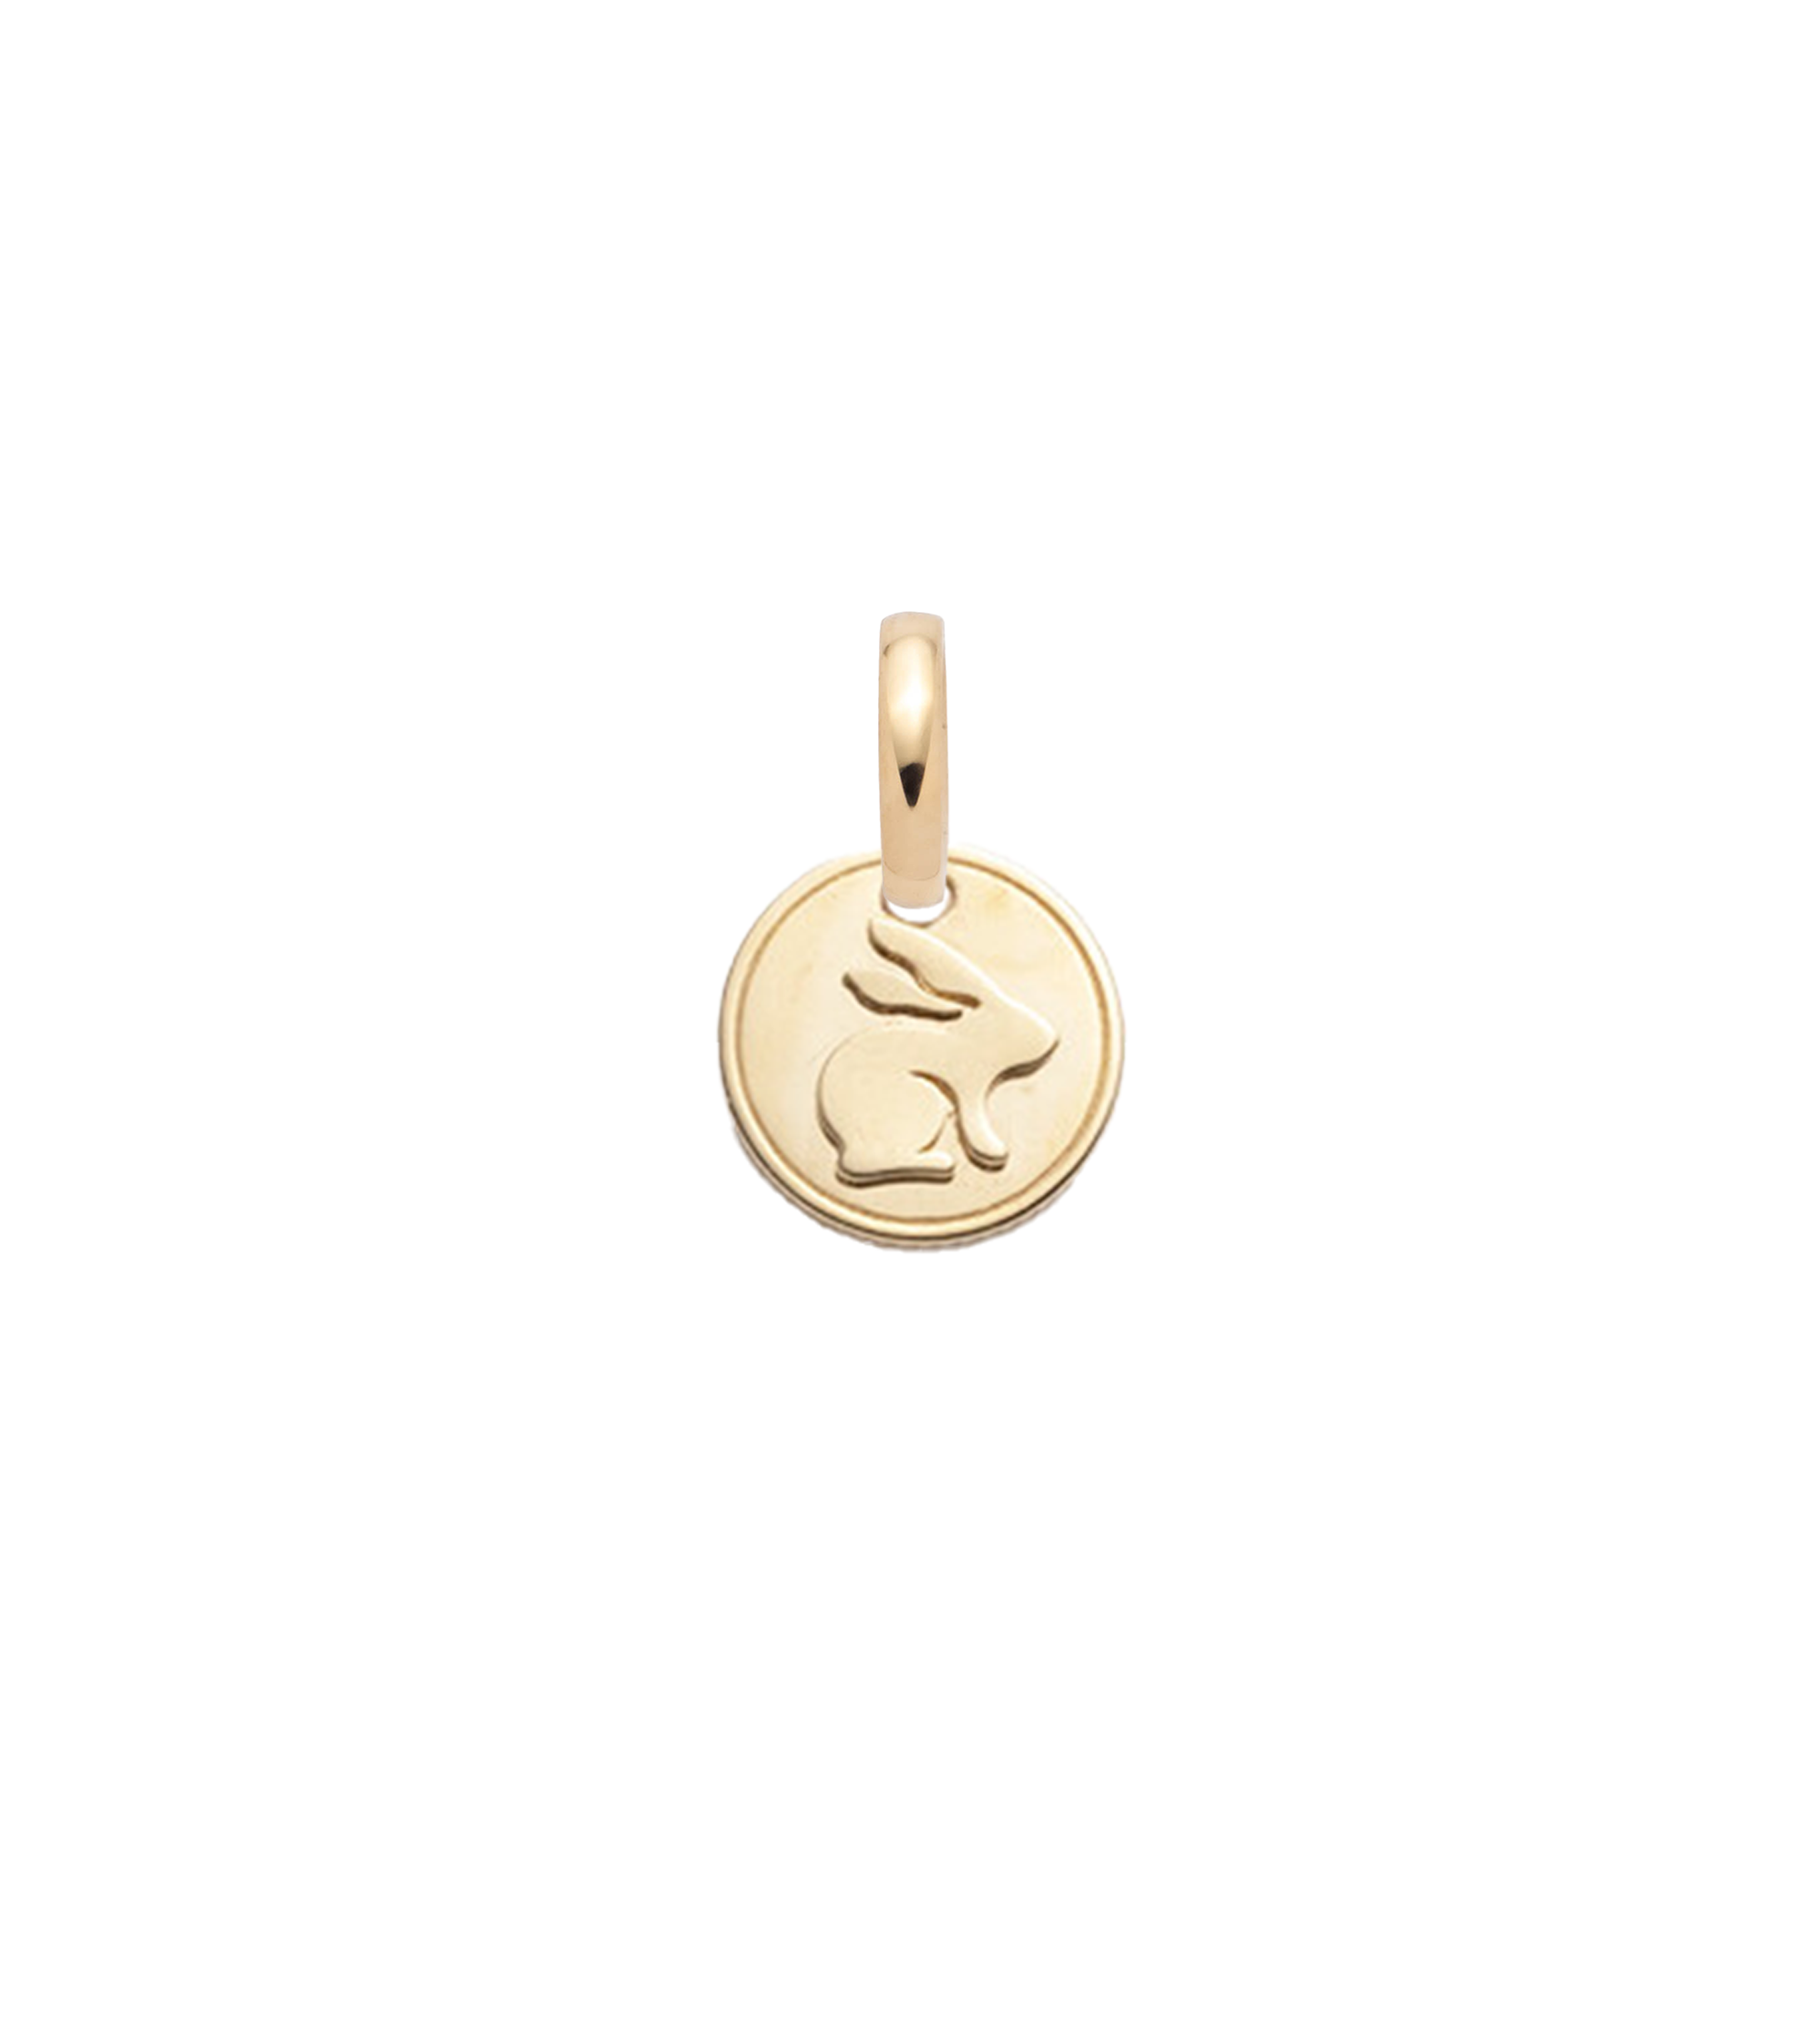 Bunny - Love : Miniature Coin with Oval Push Gate